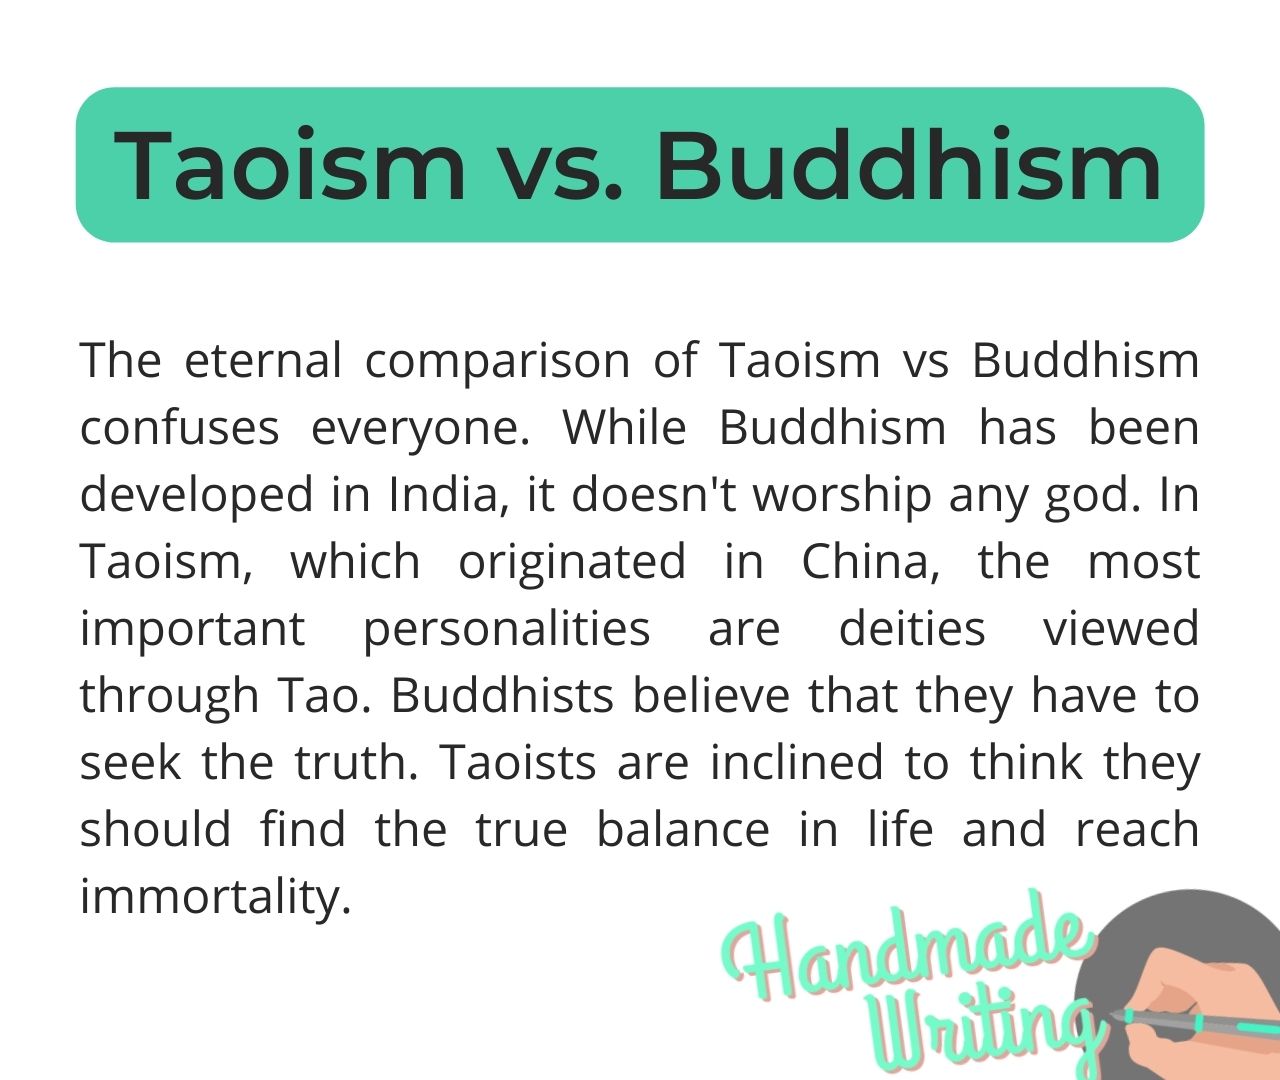 taoism and buddhism, differences amd similarities